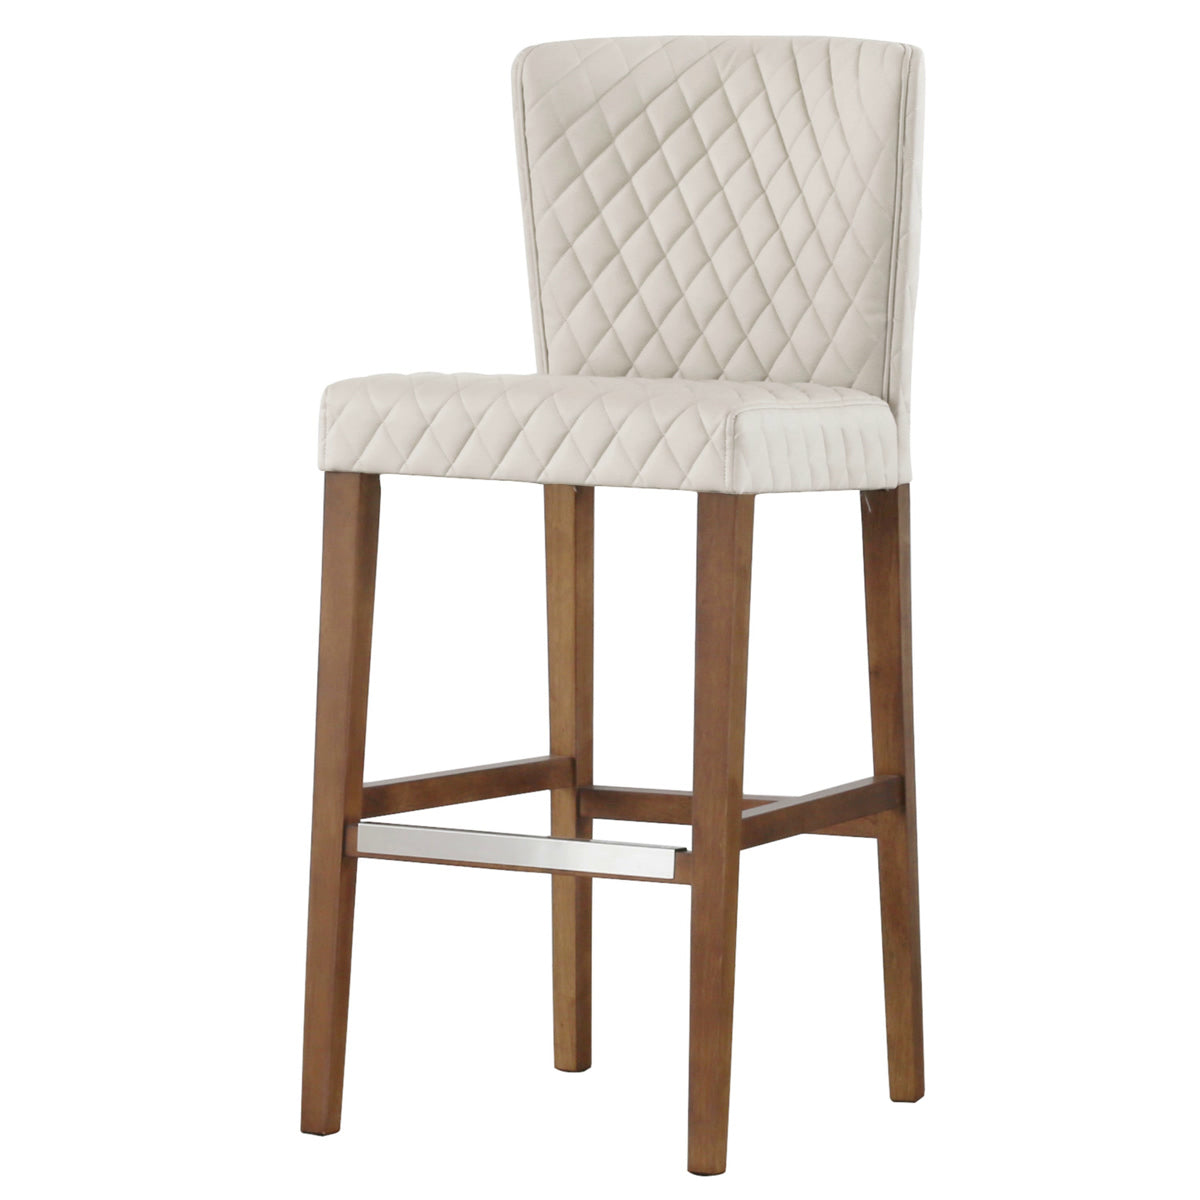 Albie Diamond Stitching PU Leather Bar Stool - Set of 2 by New Pacific Direct - 3900055-342